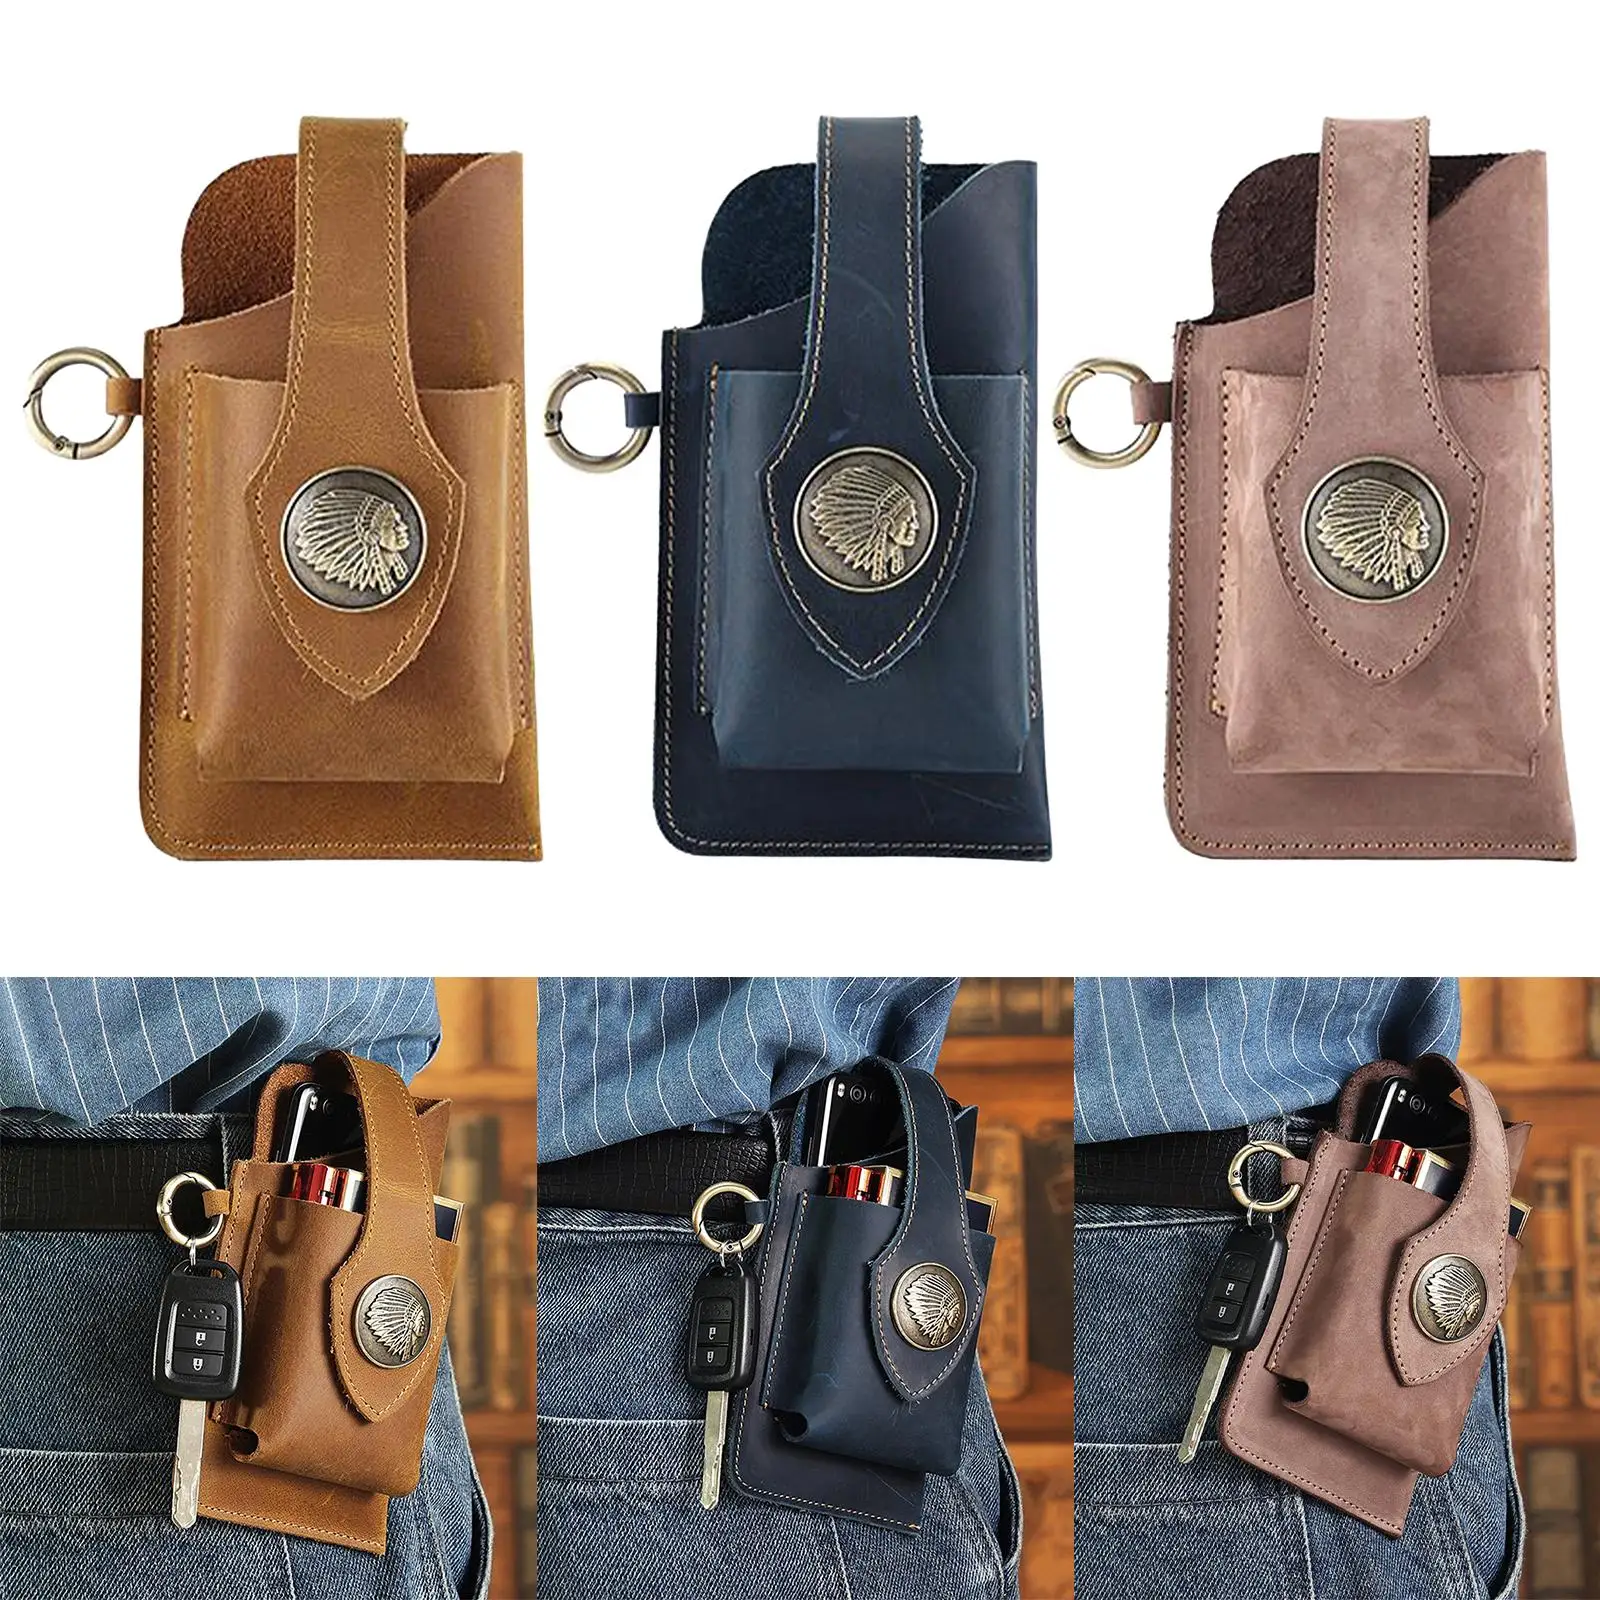 Universal Leather Phone Holster for Cell Phone Pocket Multitool Sheath for Running Outdoor